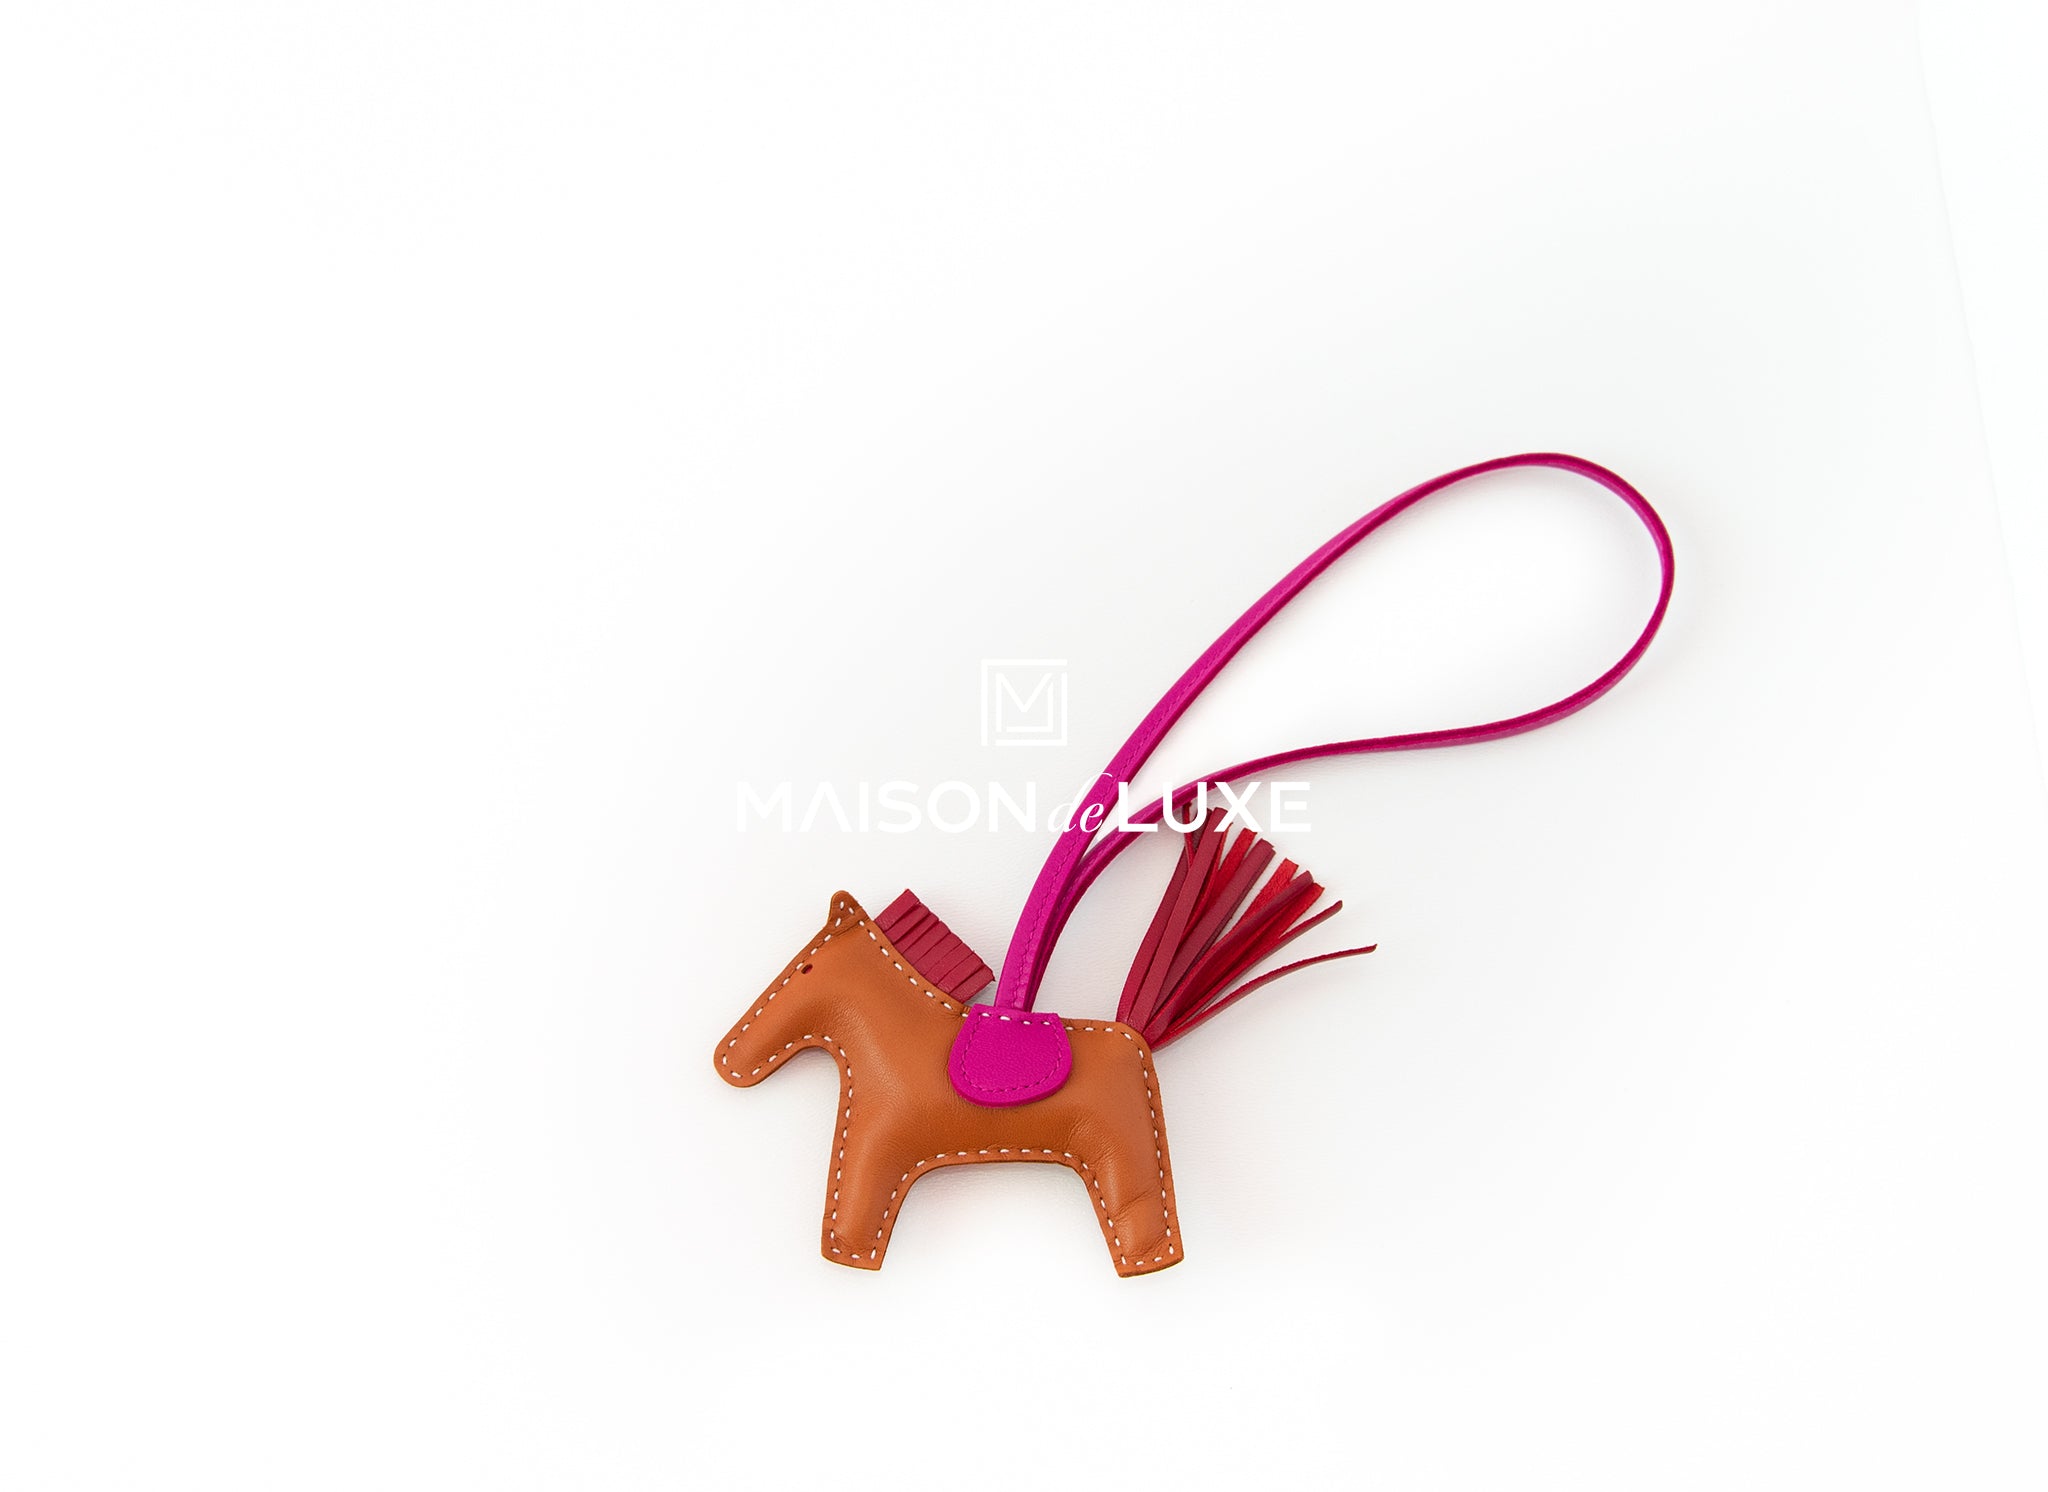 Hermes Rodeo bag charm, Colour RUBIS, Size: PM this is